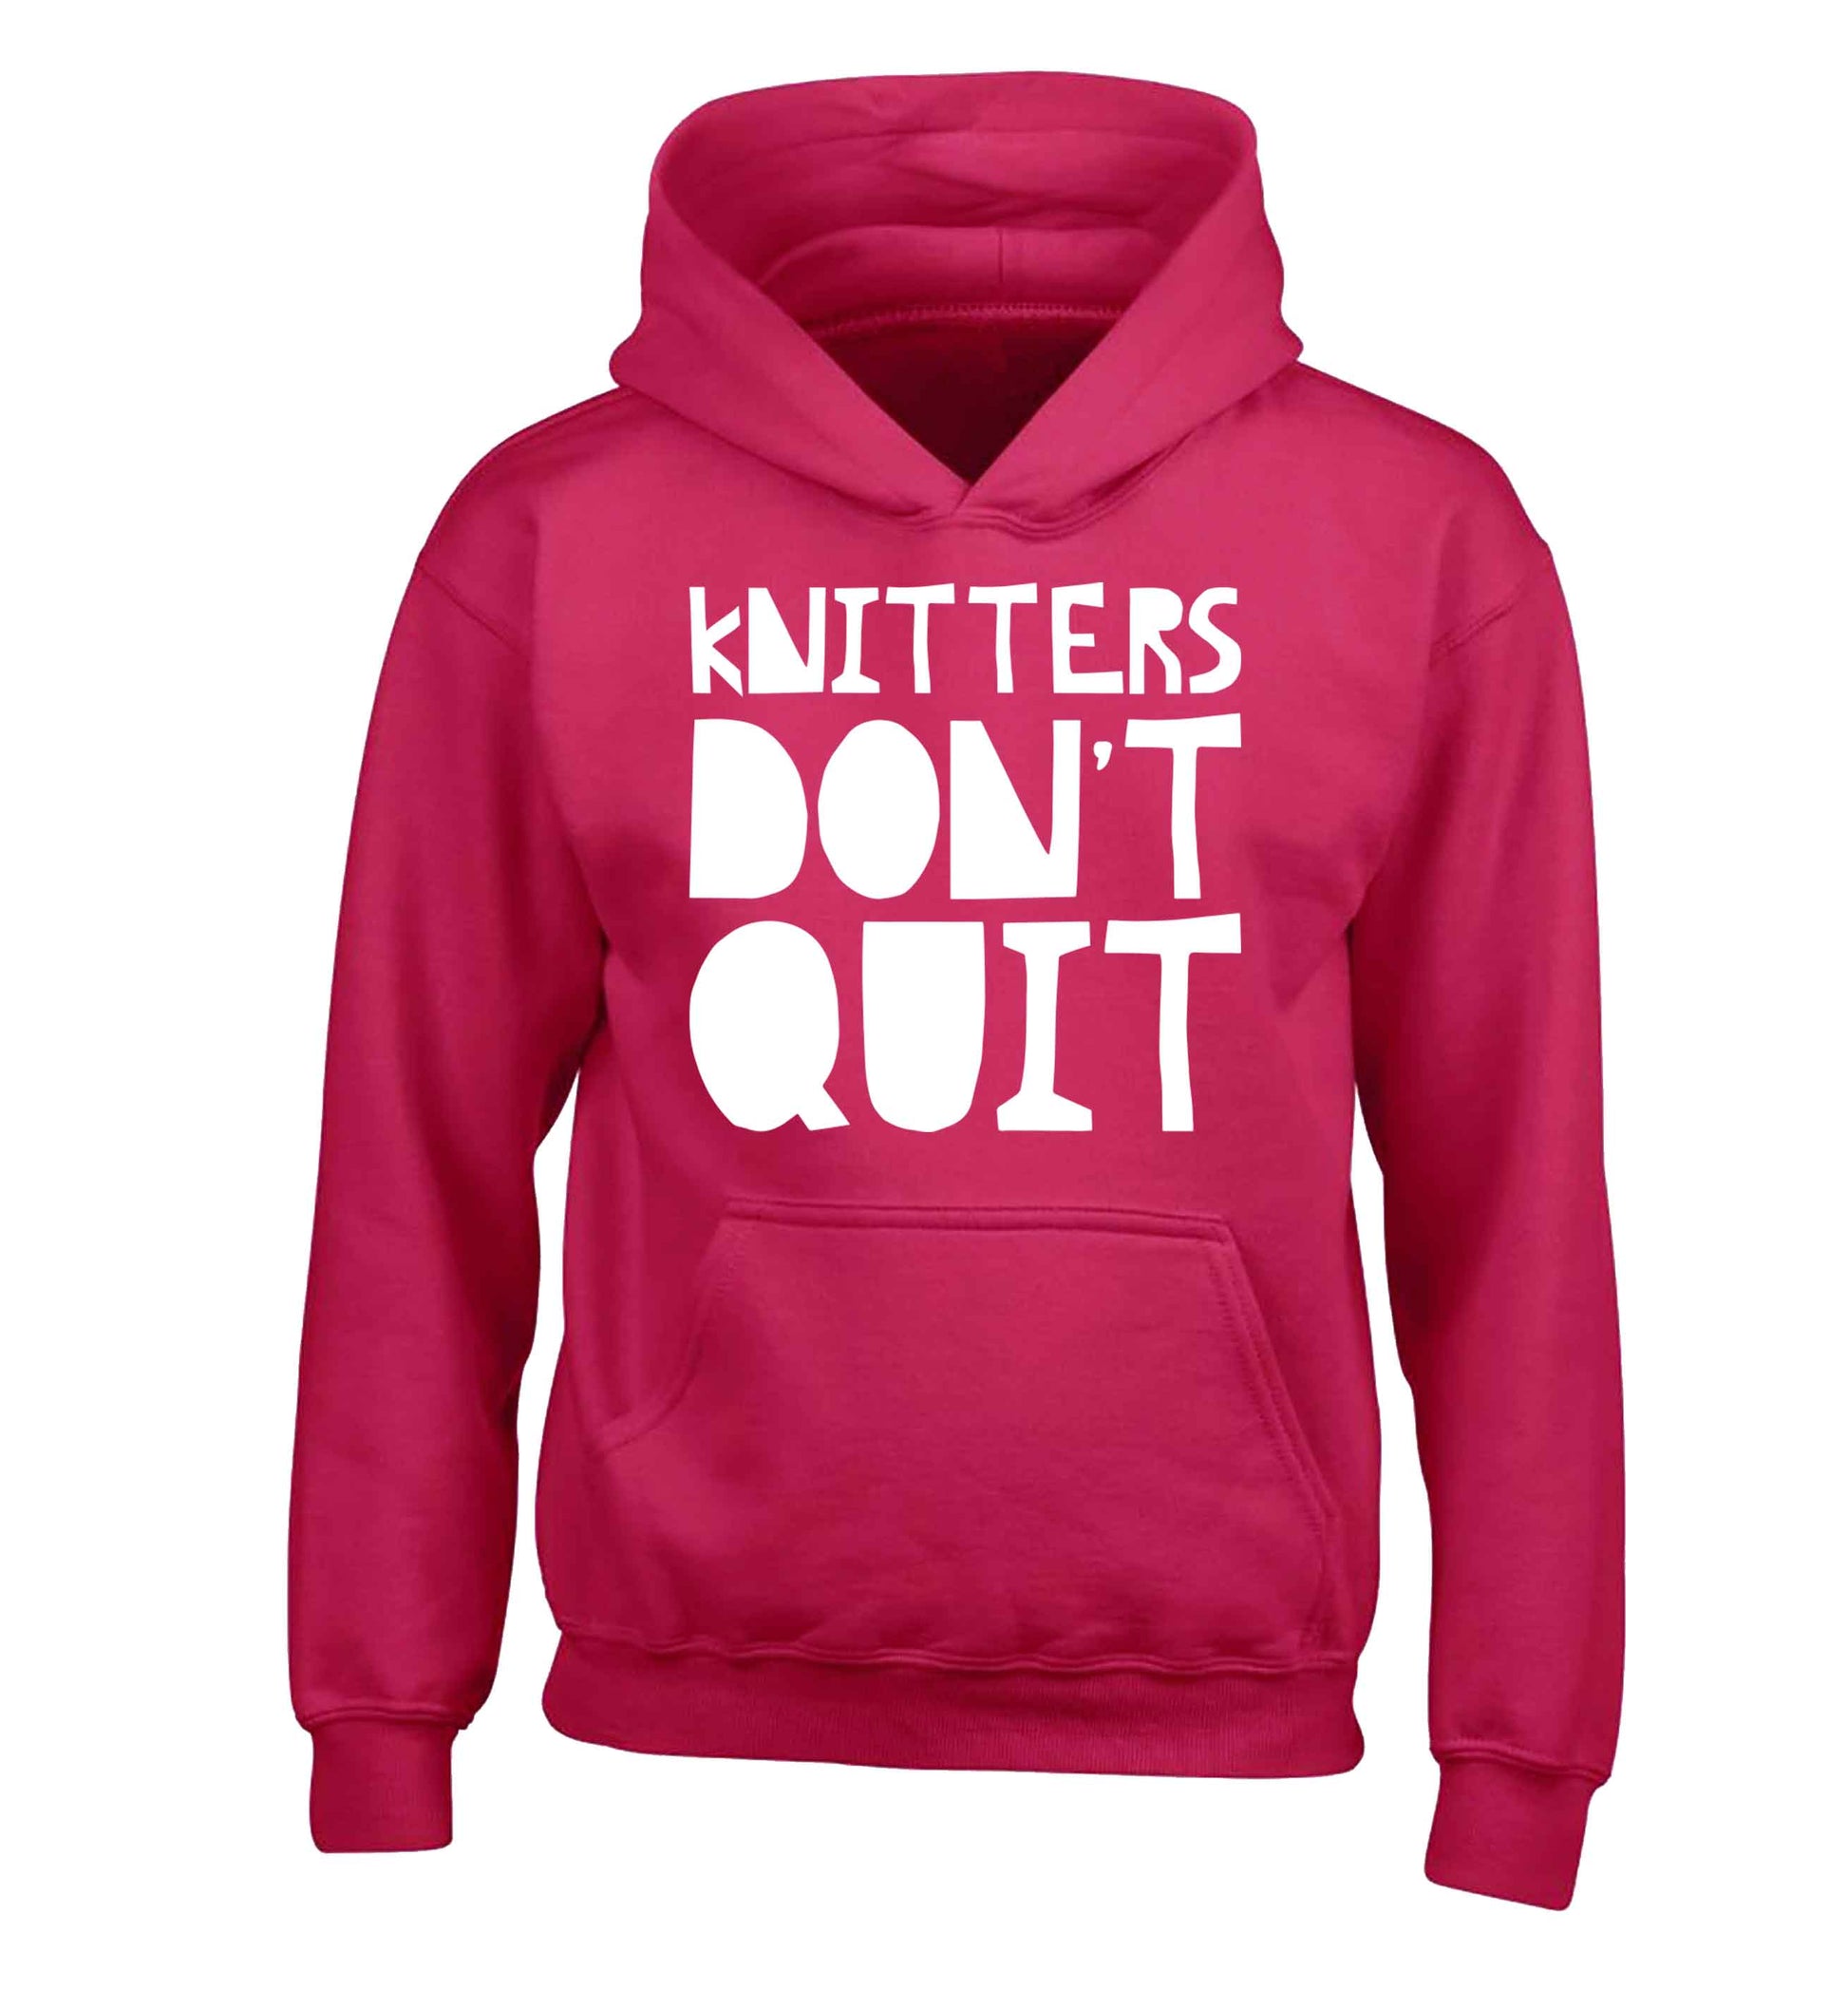 Knitters don't quit children's pink hoodie 12-13 Years